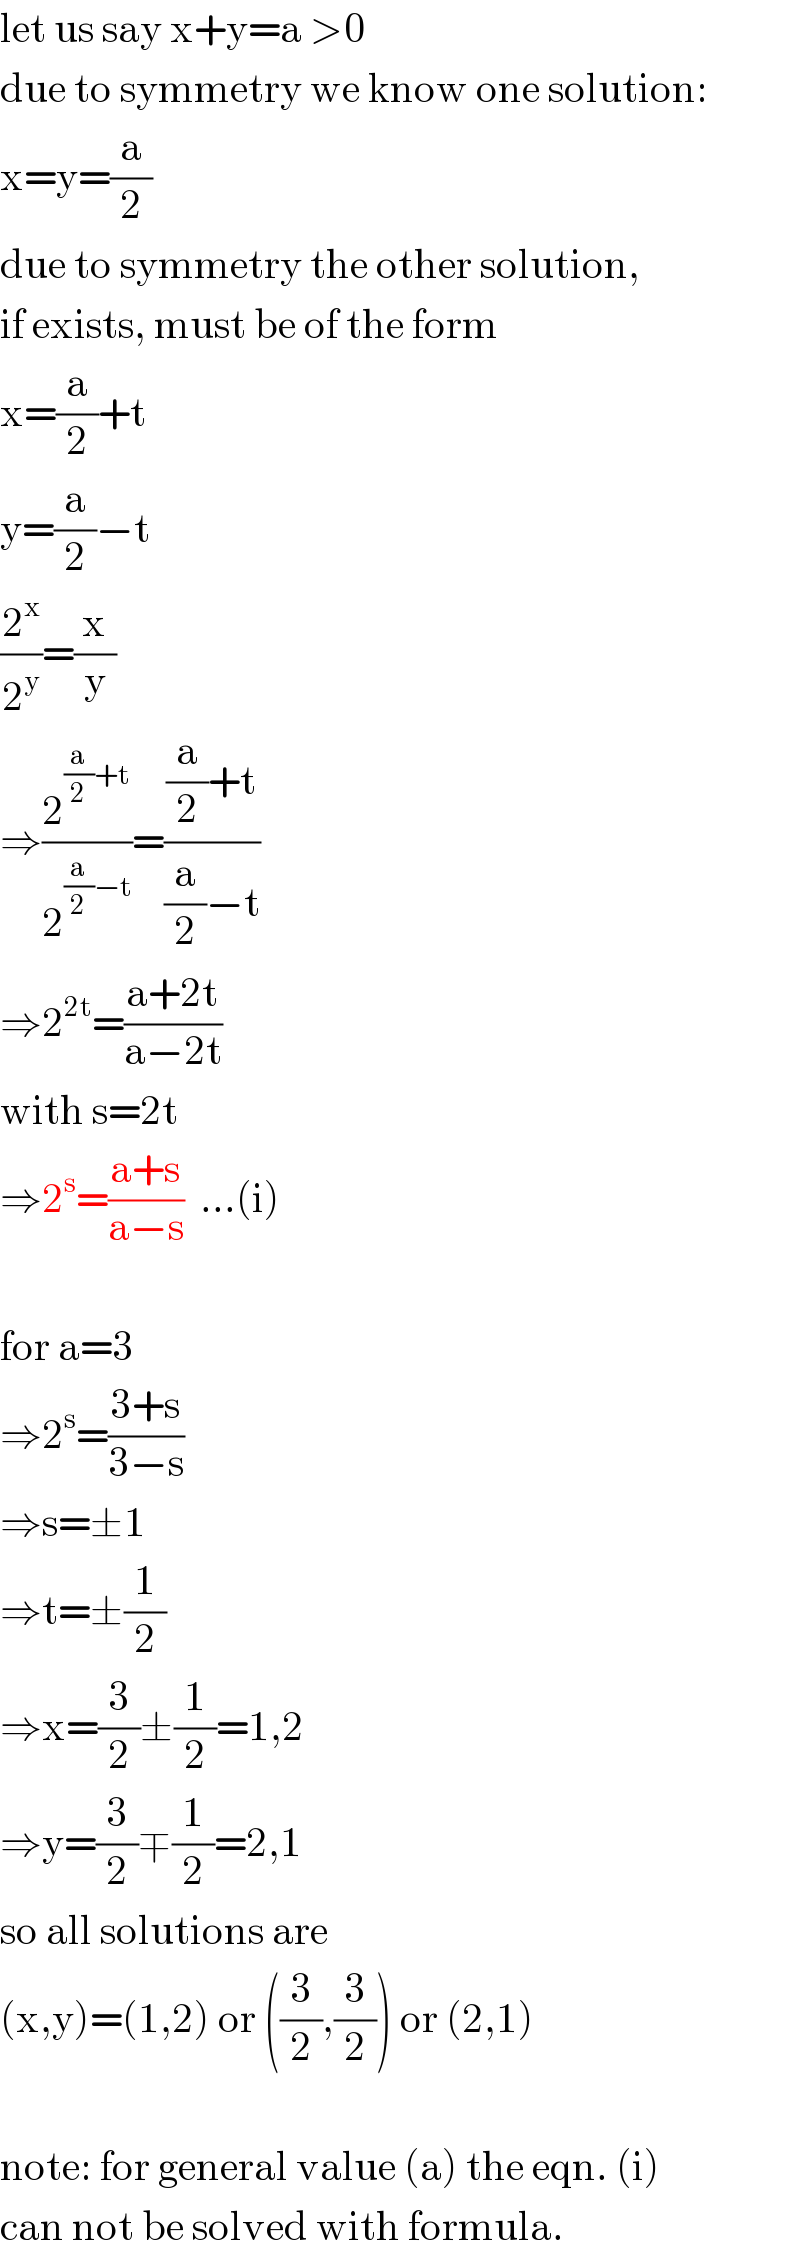 let us say x+y=a >0  due to symmetry we know one solution:  x=y=(a/2)  due to symmetry the other solution,  if exists, must be of the form  x=(a/2)+t  y=(a/2)−t  (2^x /2^y )=(x/y)  ⇒(2^((a/2)+t) /2^((a/2)−t) )=(((a/2)+t)/((a/2)−t))  ⇒2^(2t) =((a+2t)/(a−2t))  with s=2t  ⇒2^s =((a+s)/(a−s))  ...(i)    for a=3  ⇒2^s =((3+s)/(3−s))  ⇒s=±1  ⇒t=±(1/2)  ⇒x=(3/2)±(1/2)=1,2  ⇒y=(3/2)∓(1/2)=2,1  so all solutions are  (x,y)=(1,2) or ((3/2),(3/2)) or (2,1)    note: for general value (a) the eqn. (i)  can not be solved with formula.  